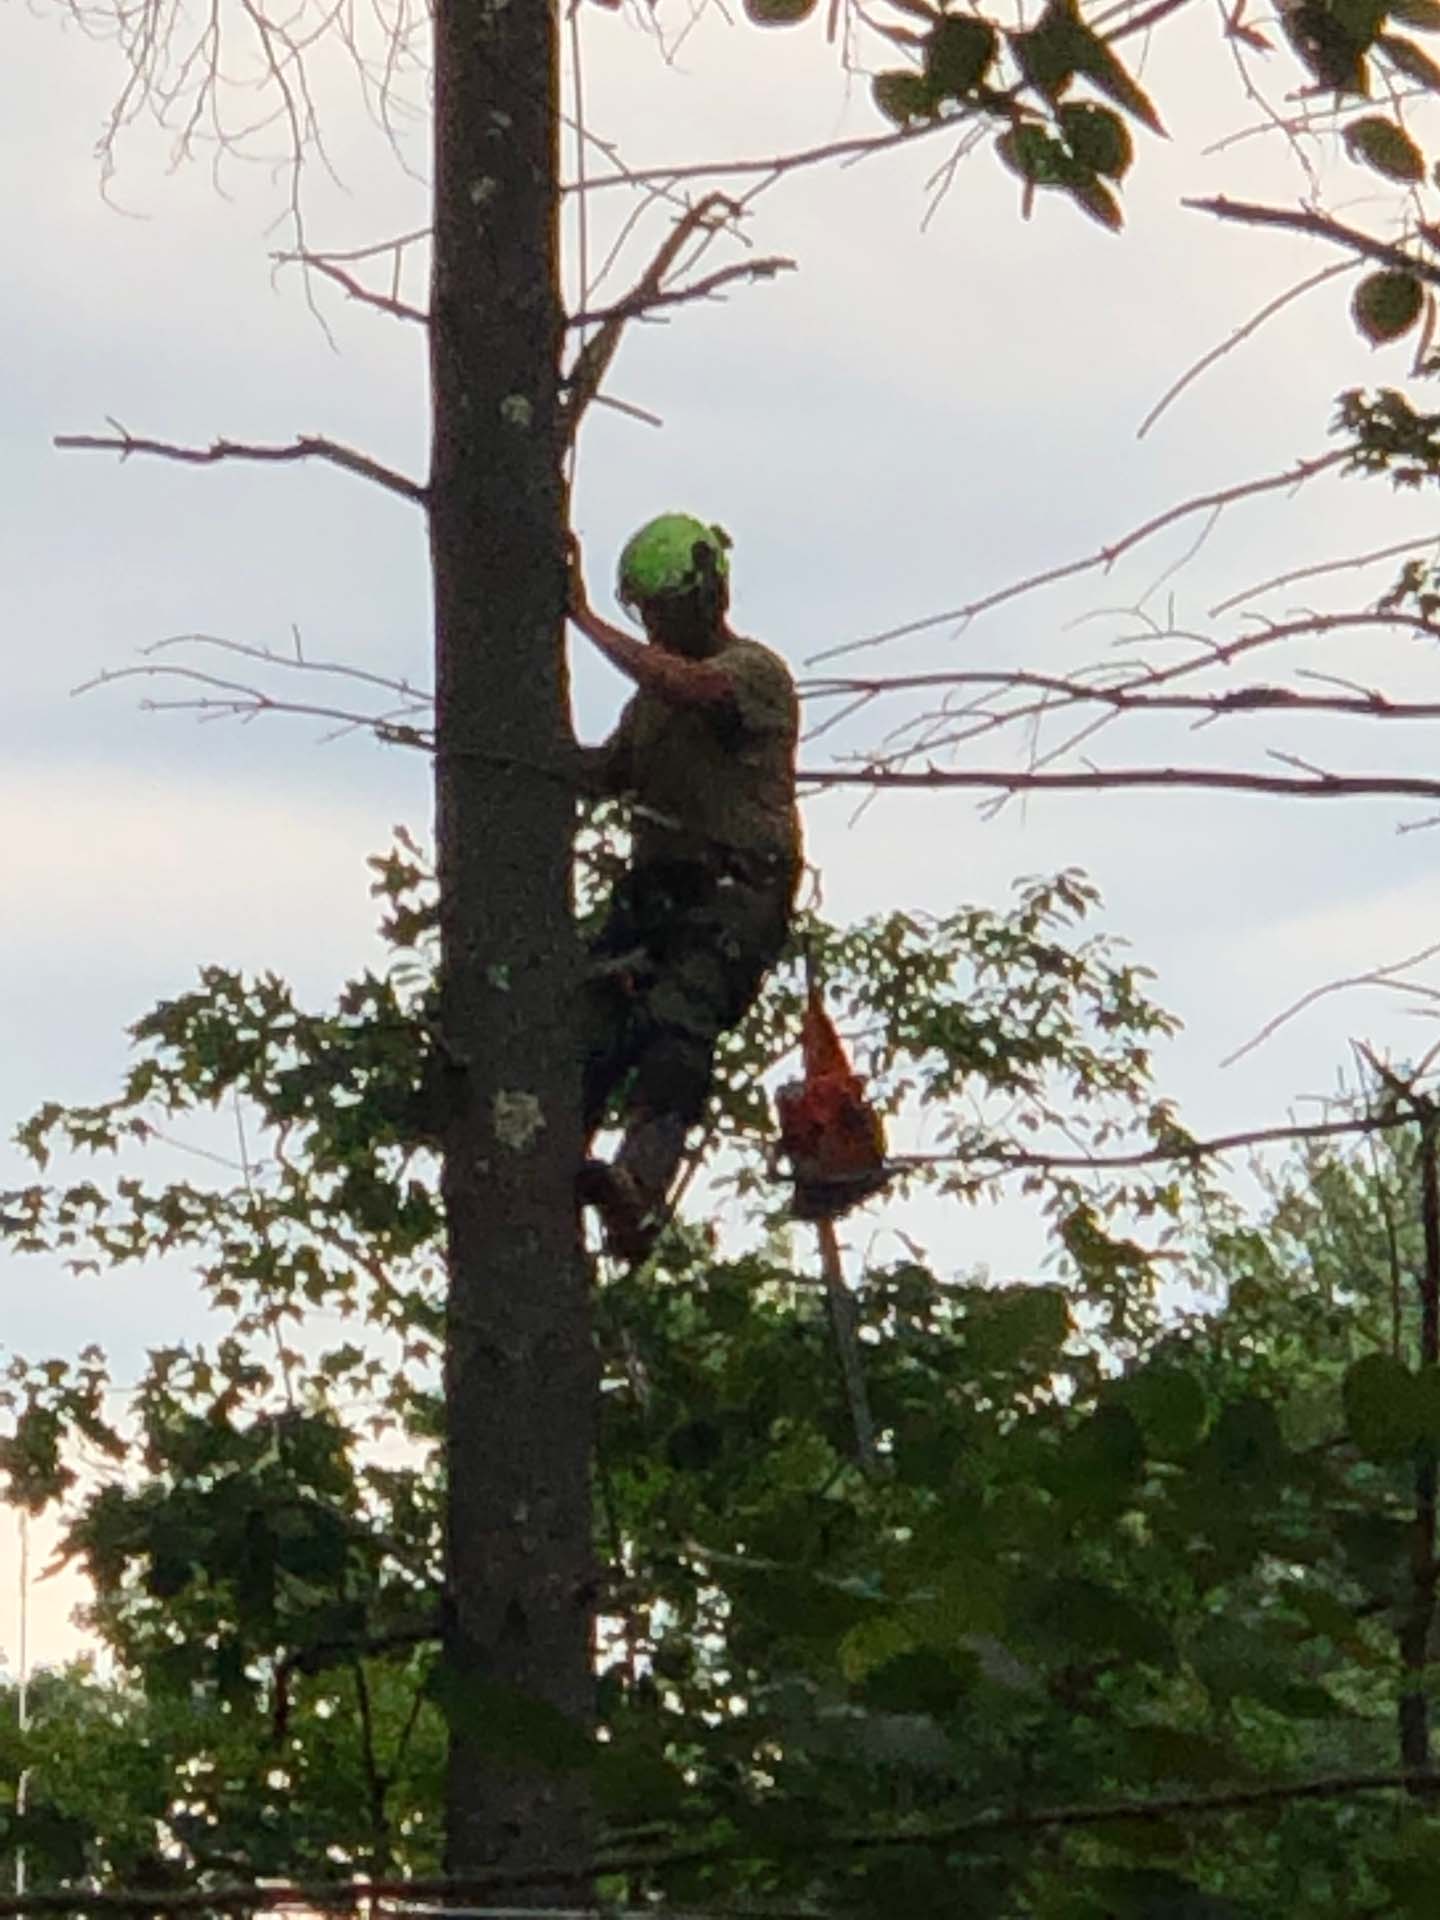 man in tree cutting branches